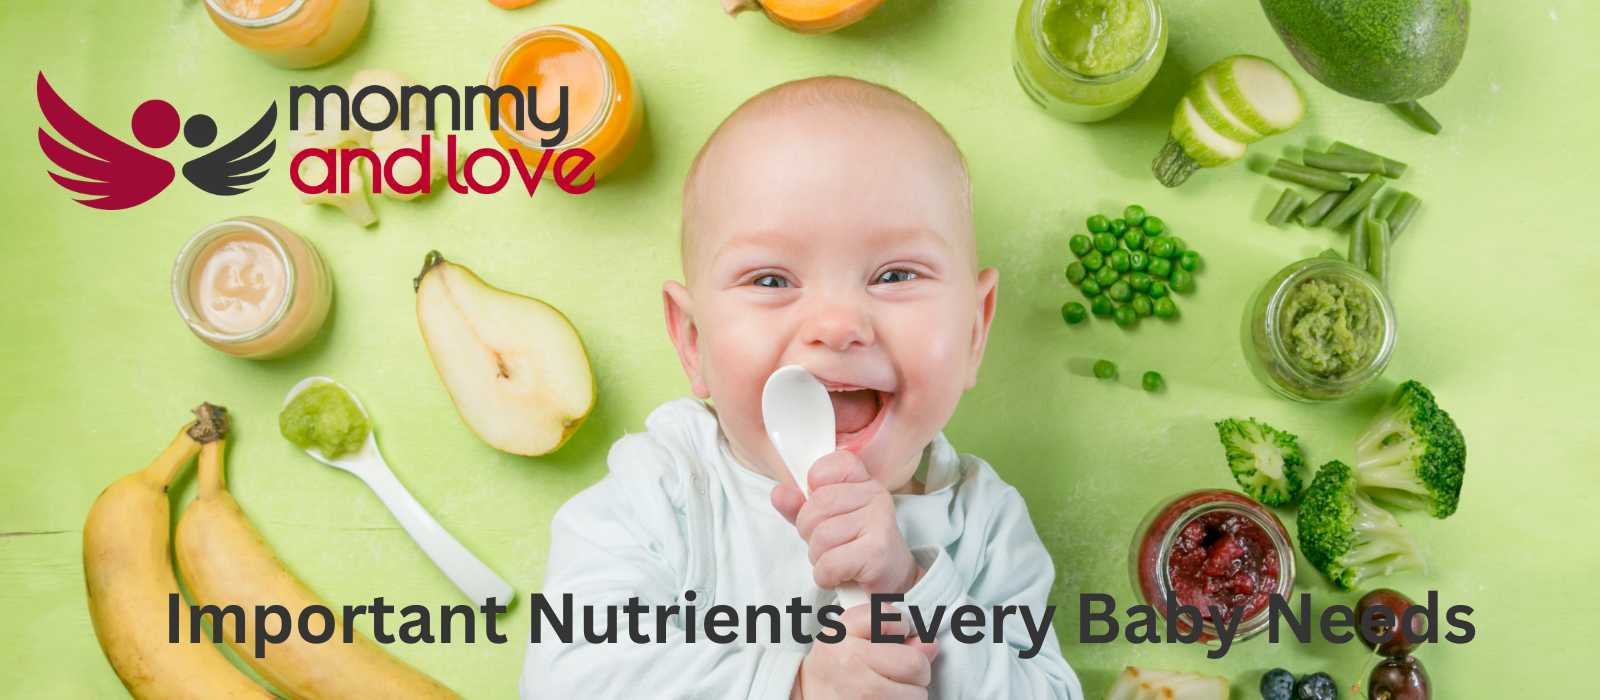 8 Important Nutrients Every Baby Needs For Healthy Growth